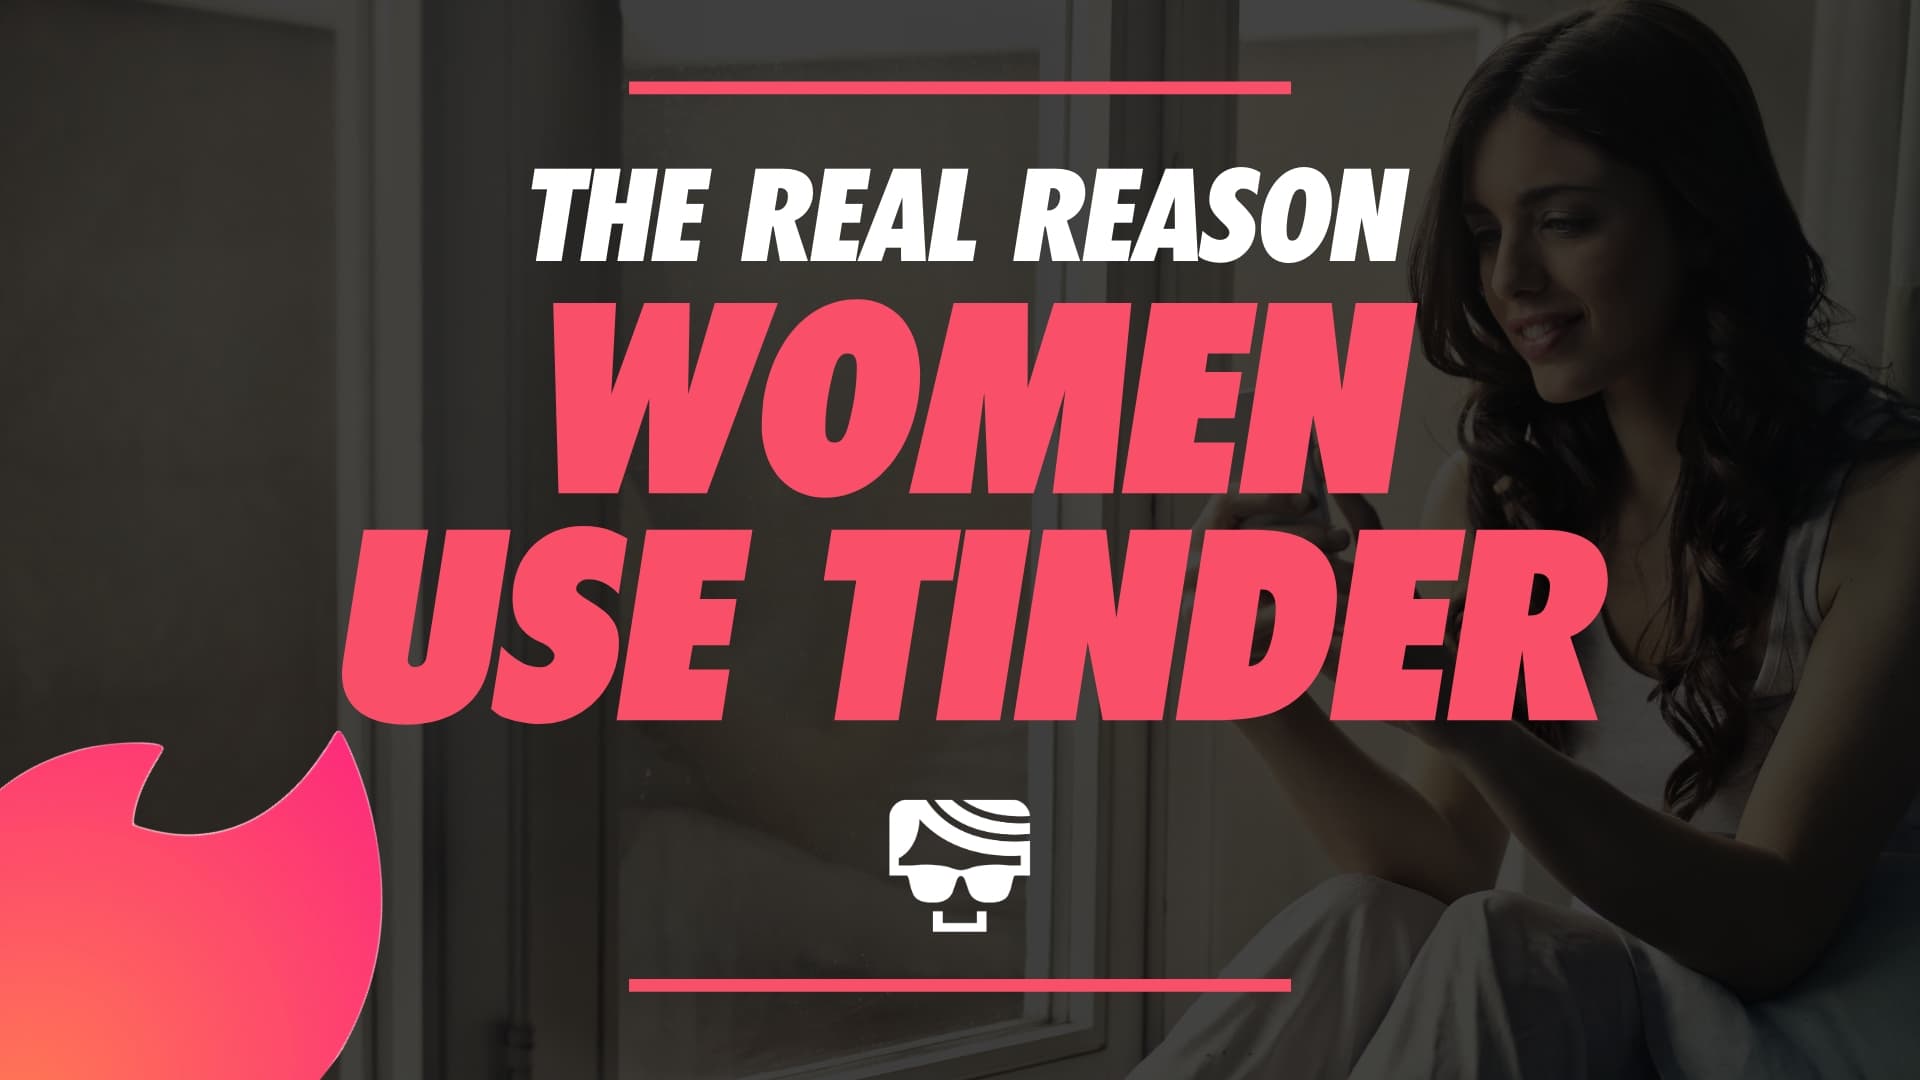 Why Do People Use Tinder? (A Look At The Reasons Women Use Tinder)